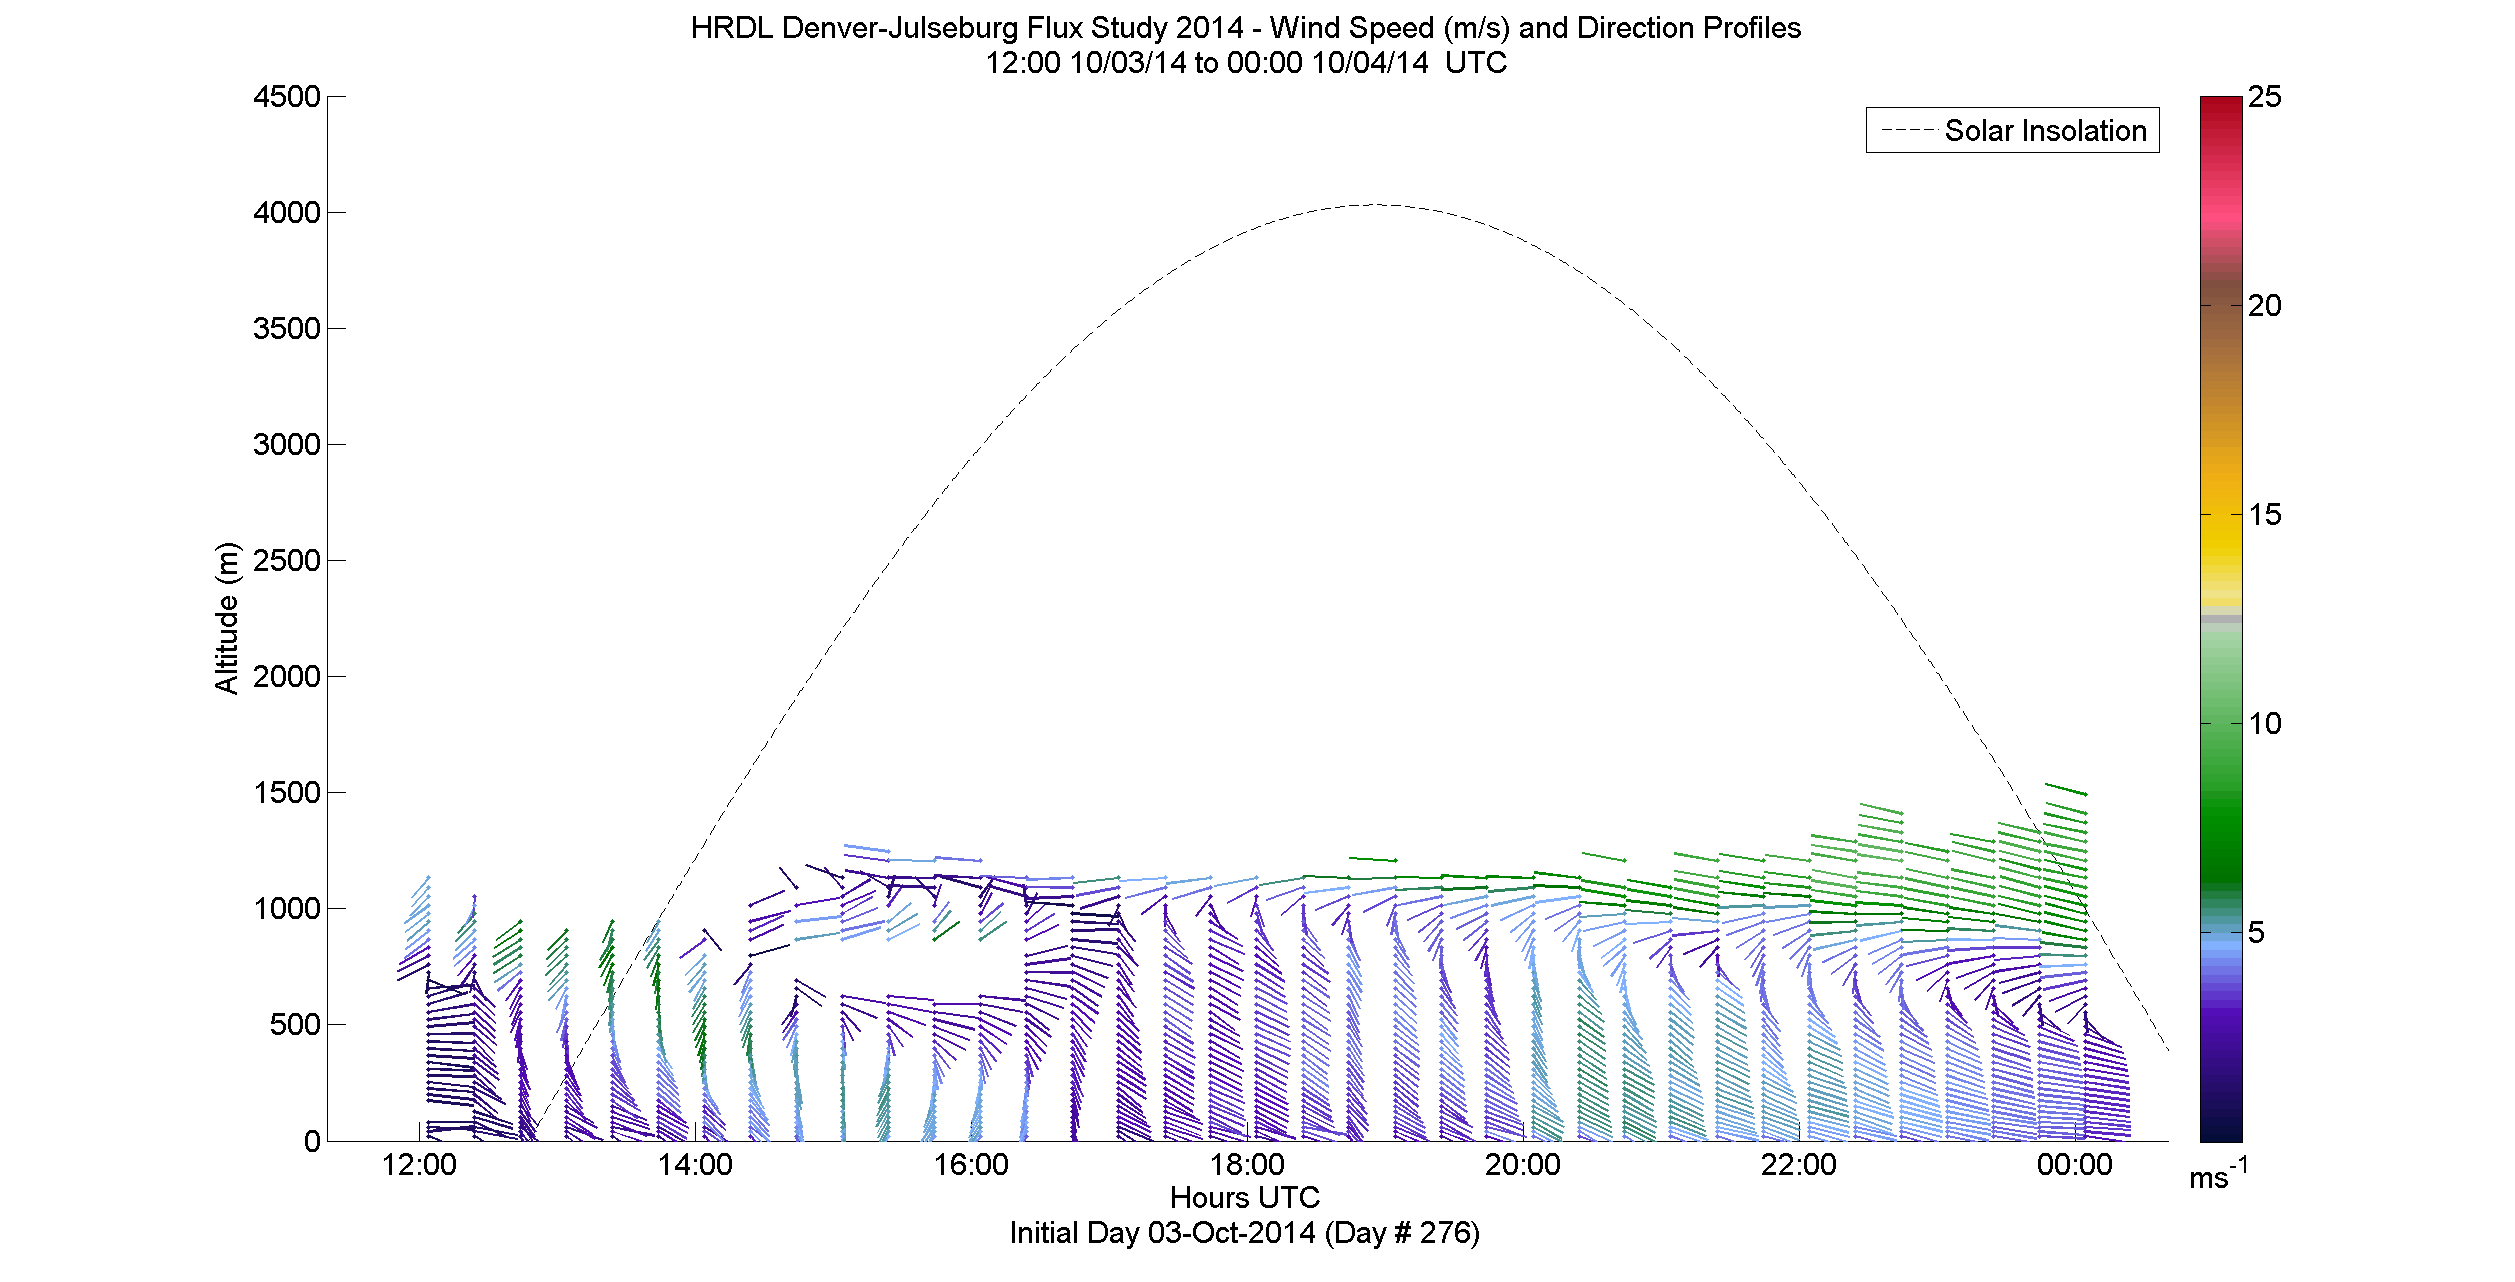 HRDL speed and direction profile - October 3 pm